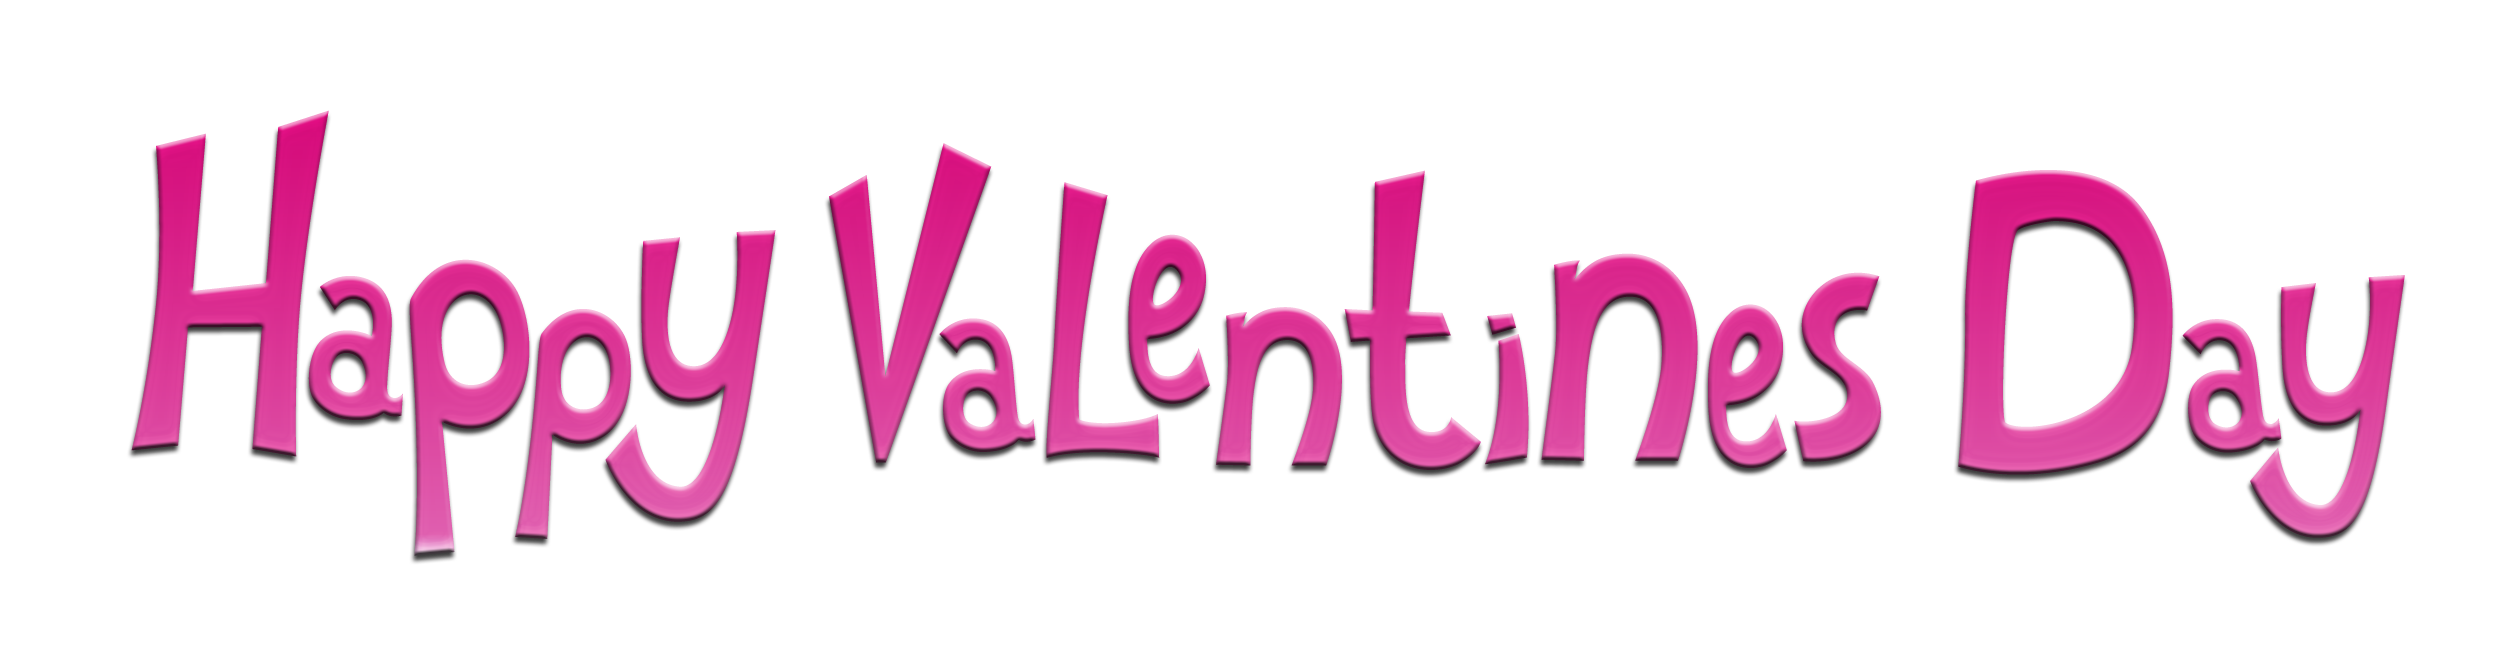 valentines day clip art for facebook - photo #31